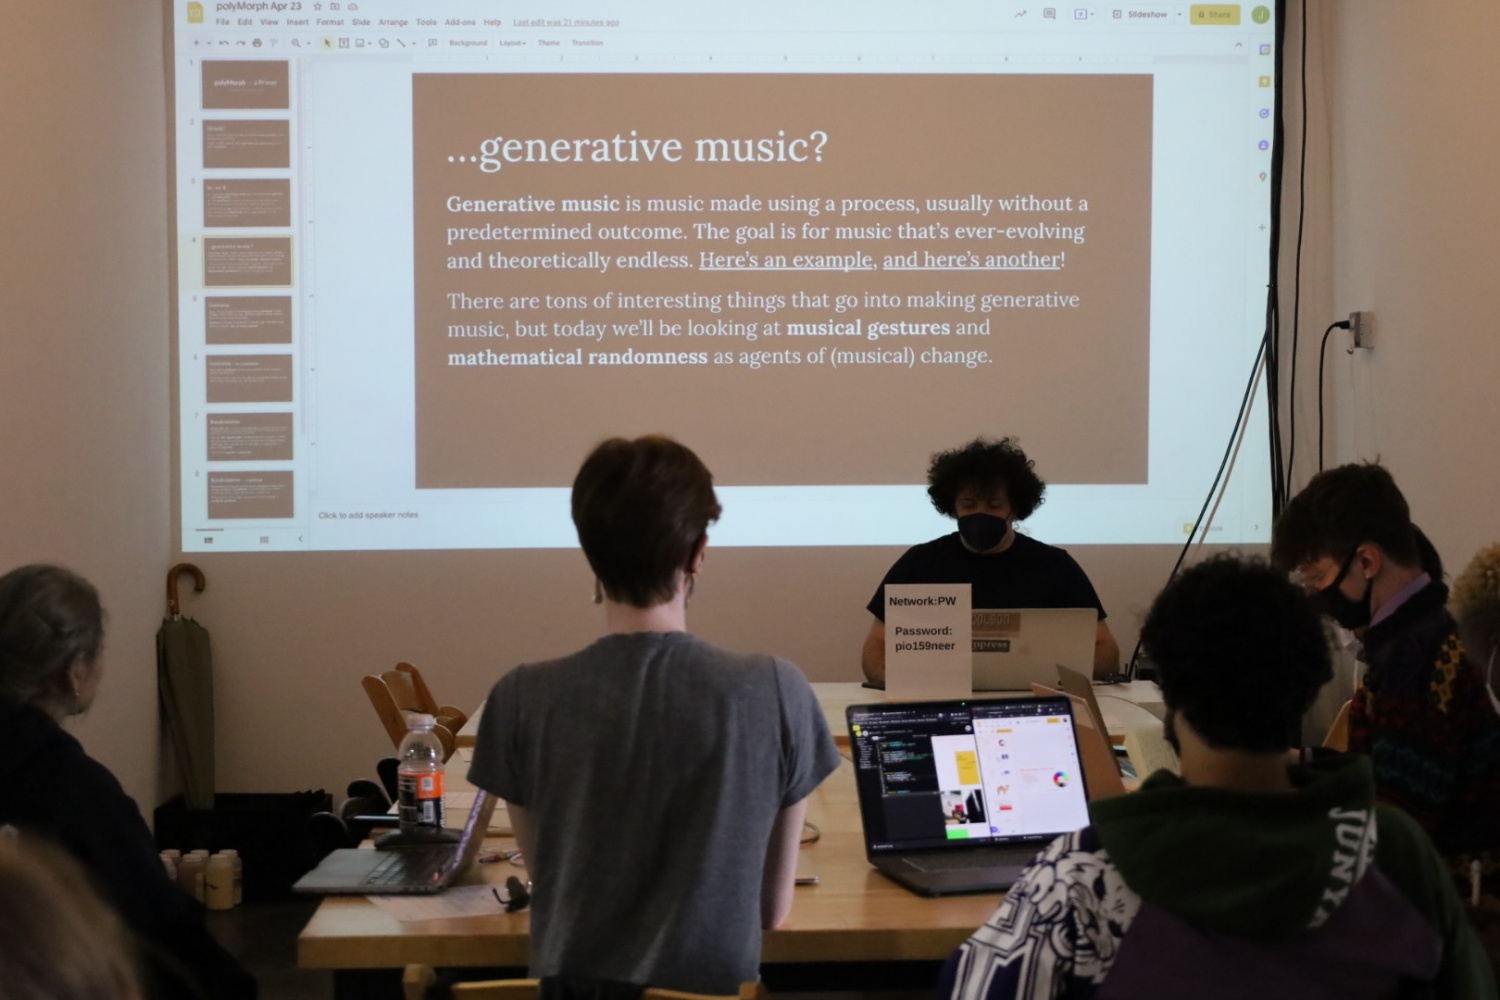 Jay Tobin, who has curly hair and wears a black mask and t-shirt, is teaching a workshop in front of a group of participants. Behind him the presentation slides reads “generative music is music made using a process, usually without a predetermined outcome. The goal is for music that’s ever-evolving and theoretically endless. Here’s an example, and here’s another! There are tons of interesting things that go into making generative music, but today we’ll be looking at musical gestures and mathematical randomness as agents of (musical) change.”